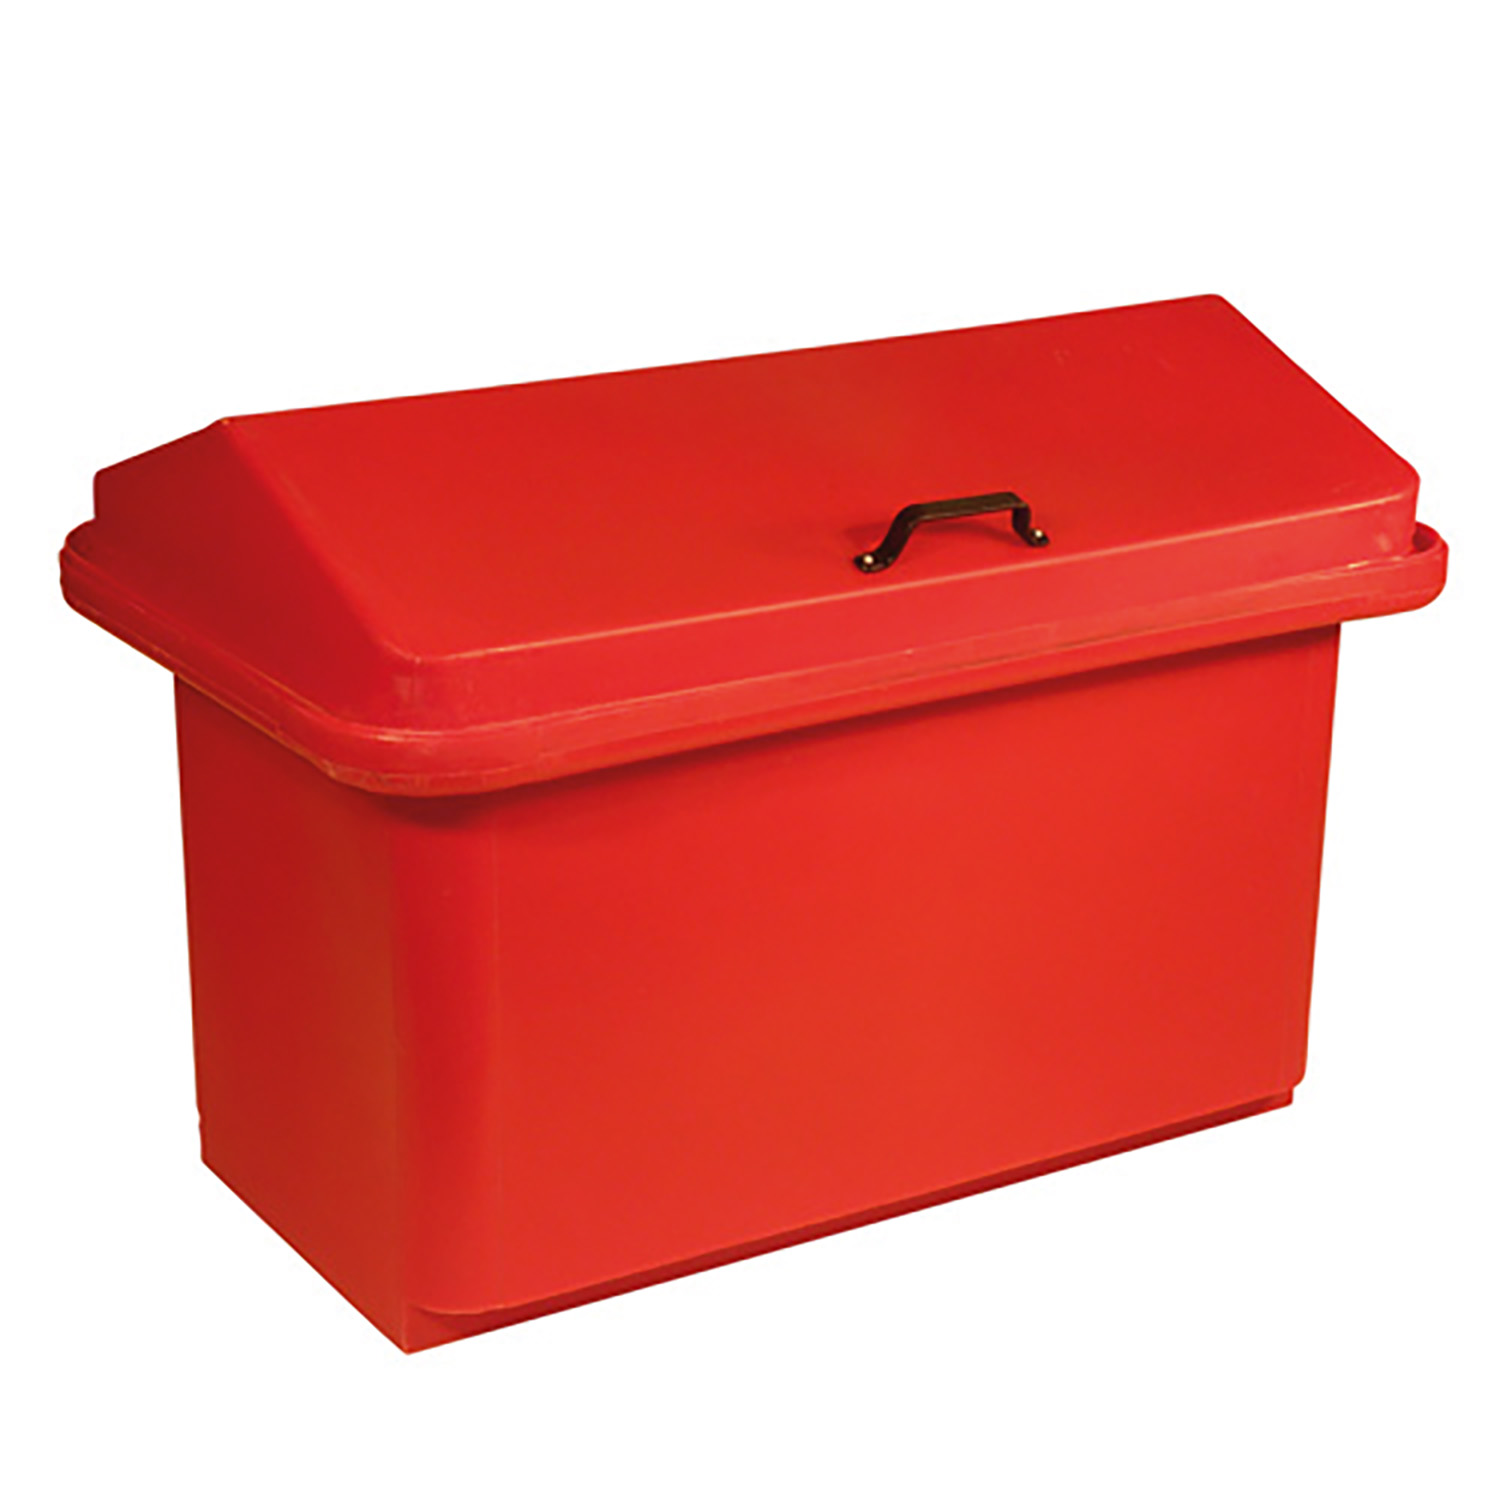 STUBBS STATIC CHEST ONE COMPARTMENT S5831 RED ONE COMPARTMENT STATIC